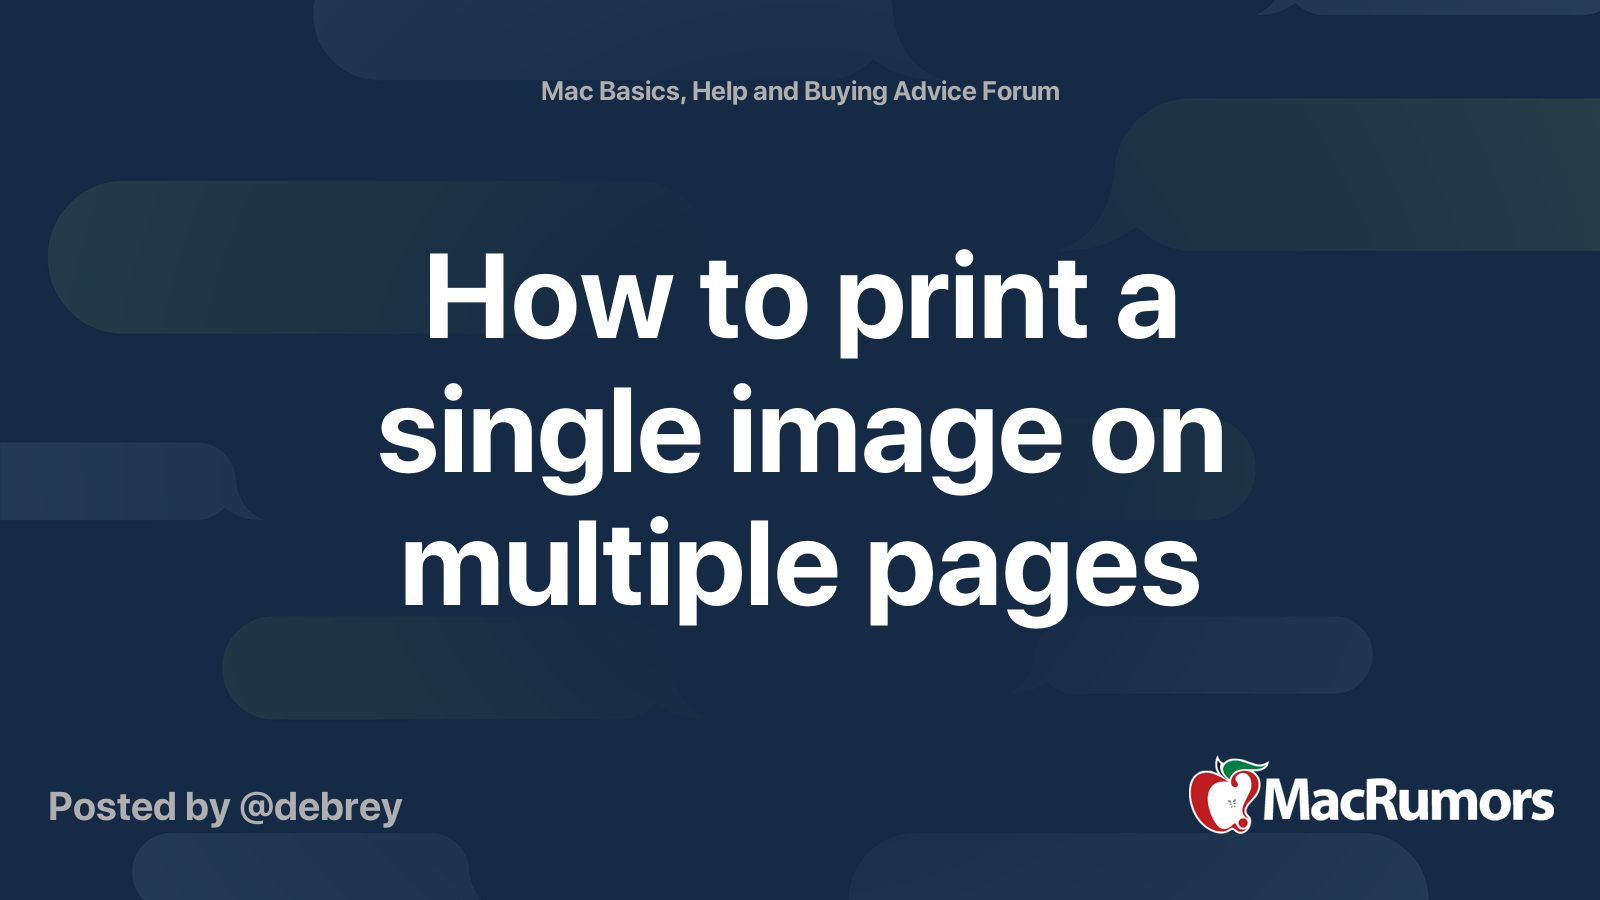 how-to-print-a-single-image-on-multiple-pages-macrumors-forums